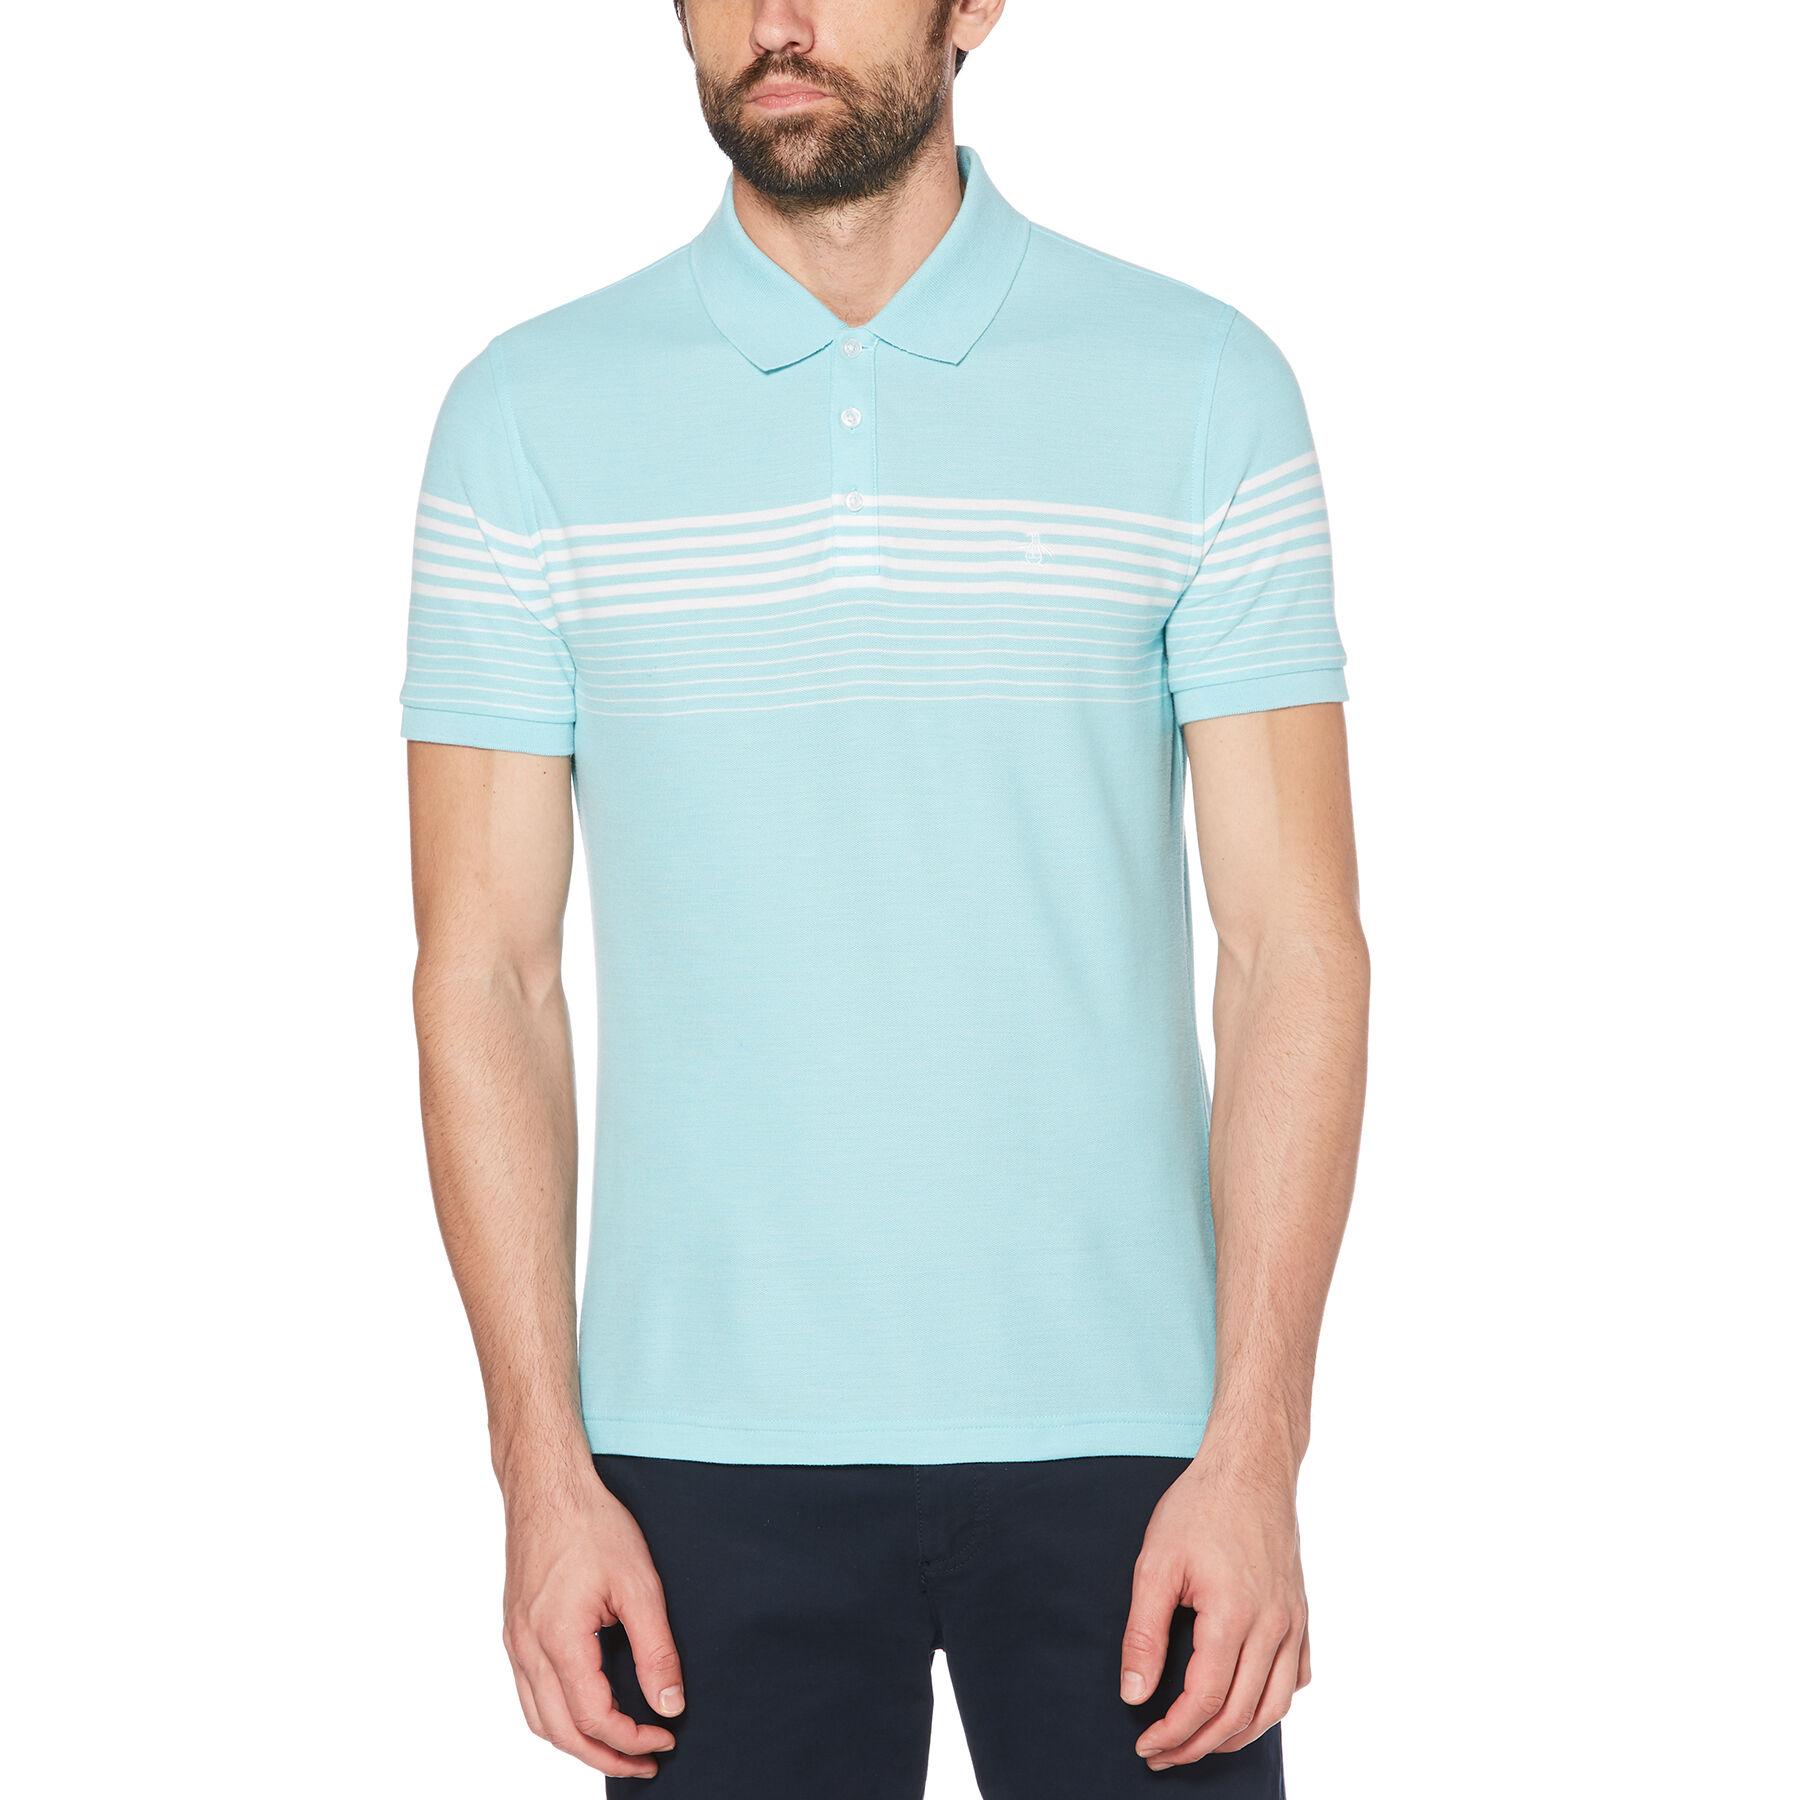 Original Penguin Heathered Engineered Stripe Polo in Blue for Men - Lyst